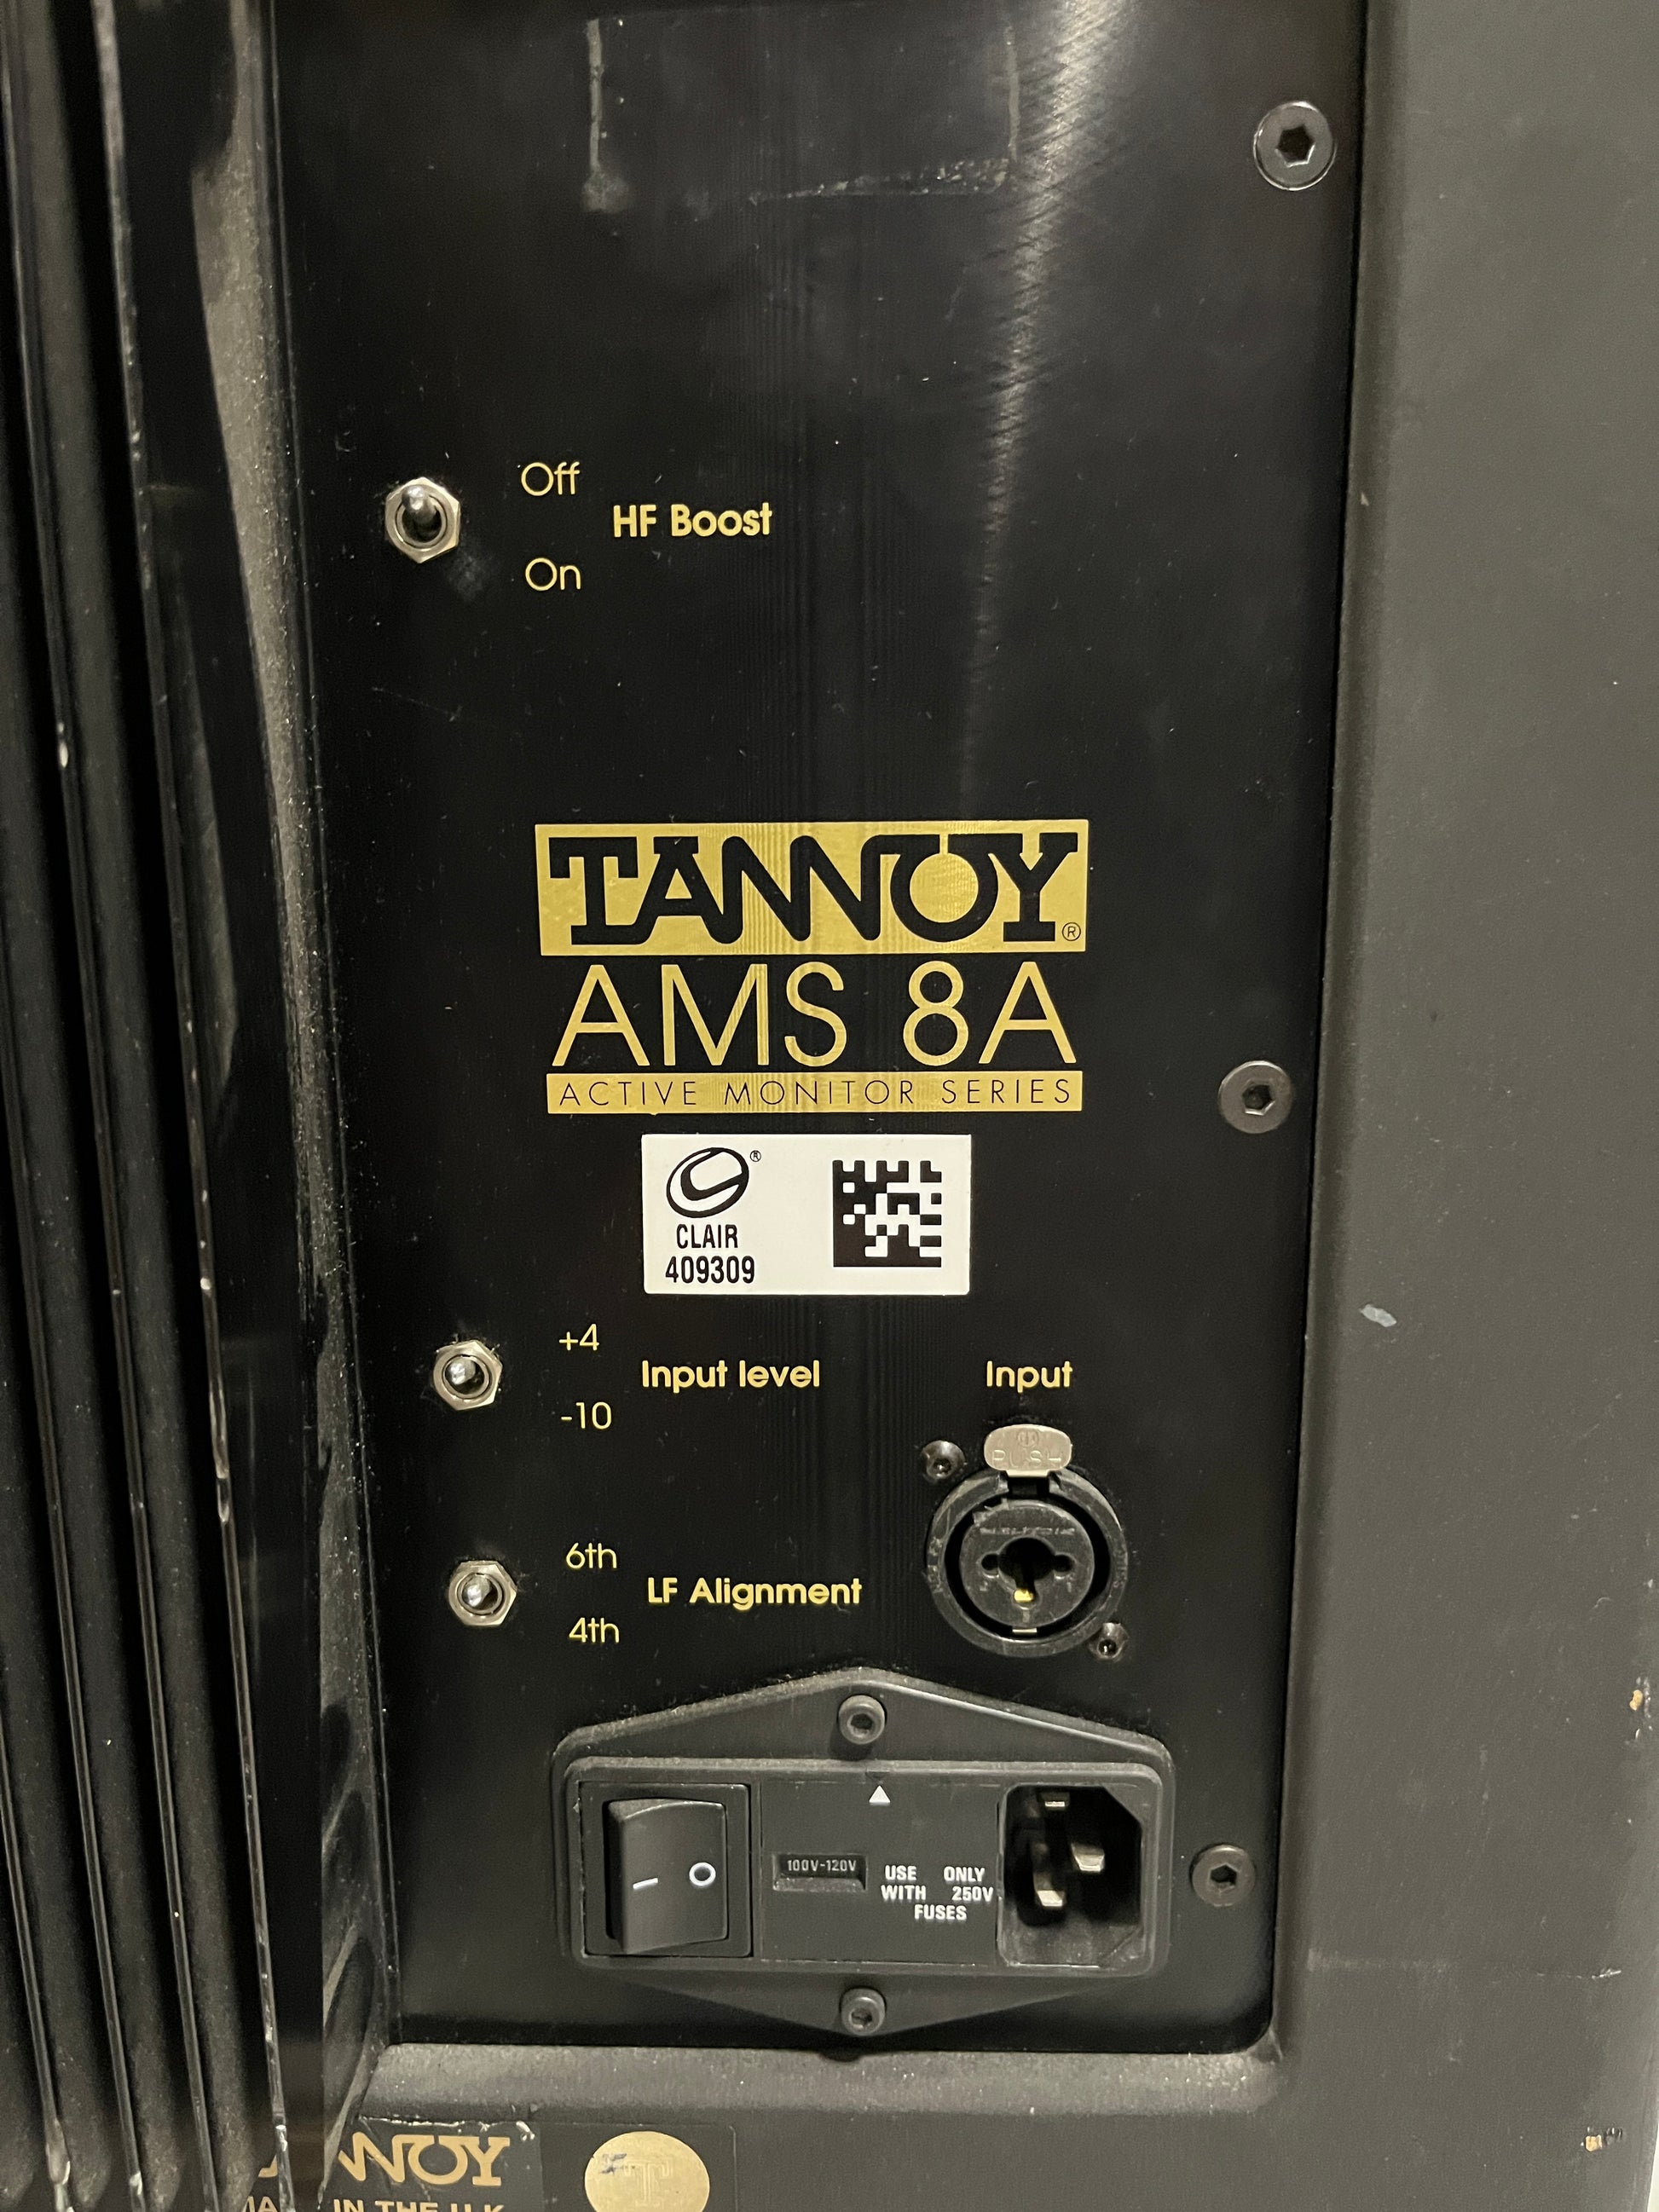 Parts/Not Working Tannoy AMS 8A, Missing Woofer for Sale. We Sell Professional Audio Equipment. Audio Systems, Amplifiers, Consoles, Mixers, Electronics, Entertainment, Sound, Live.